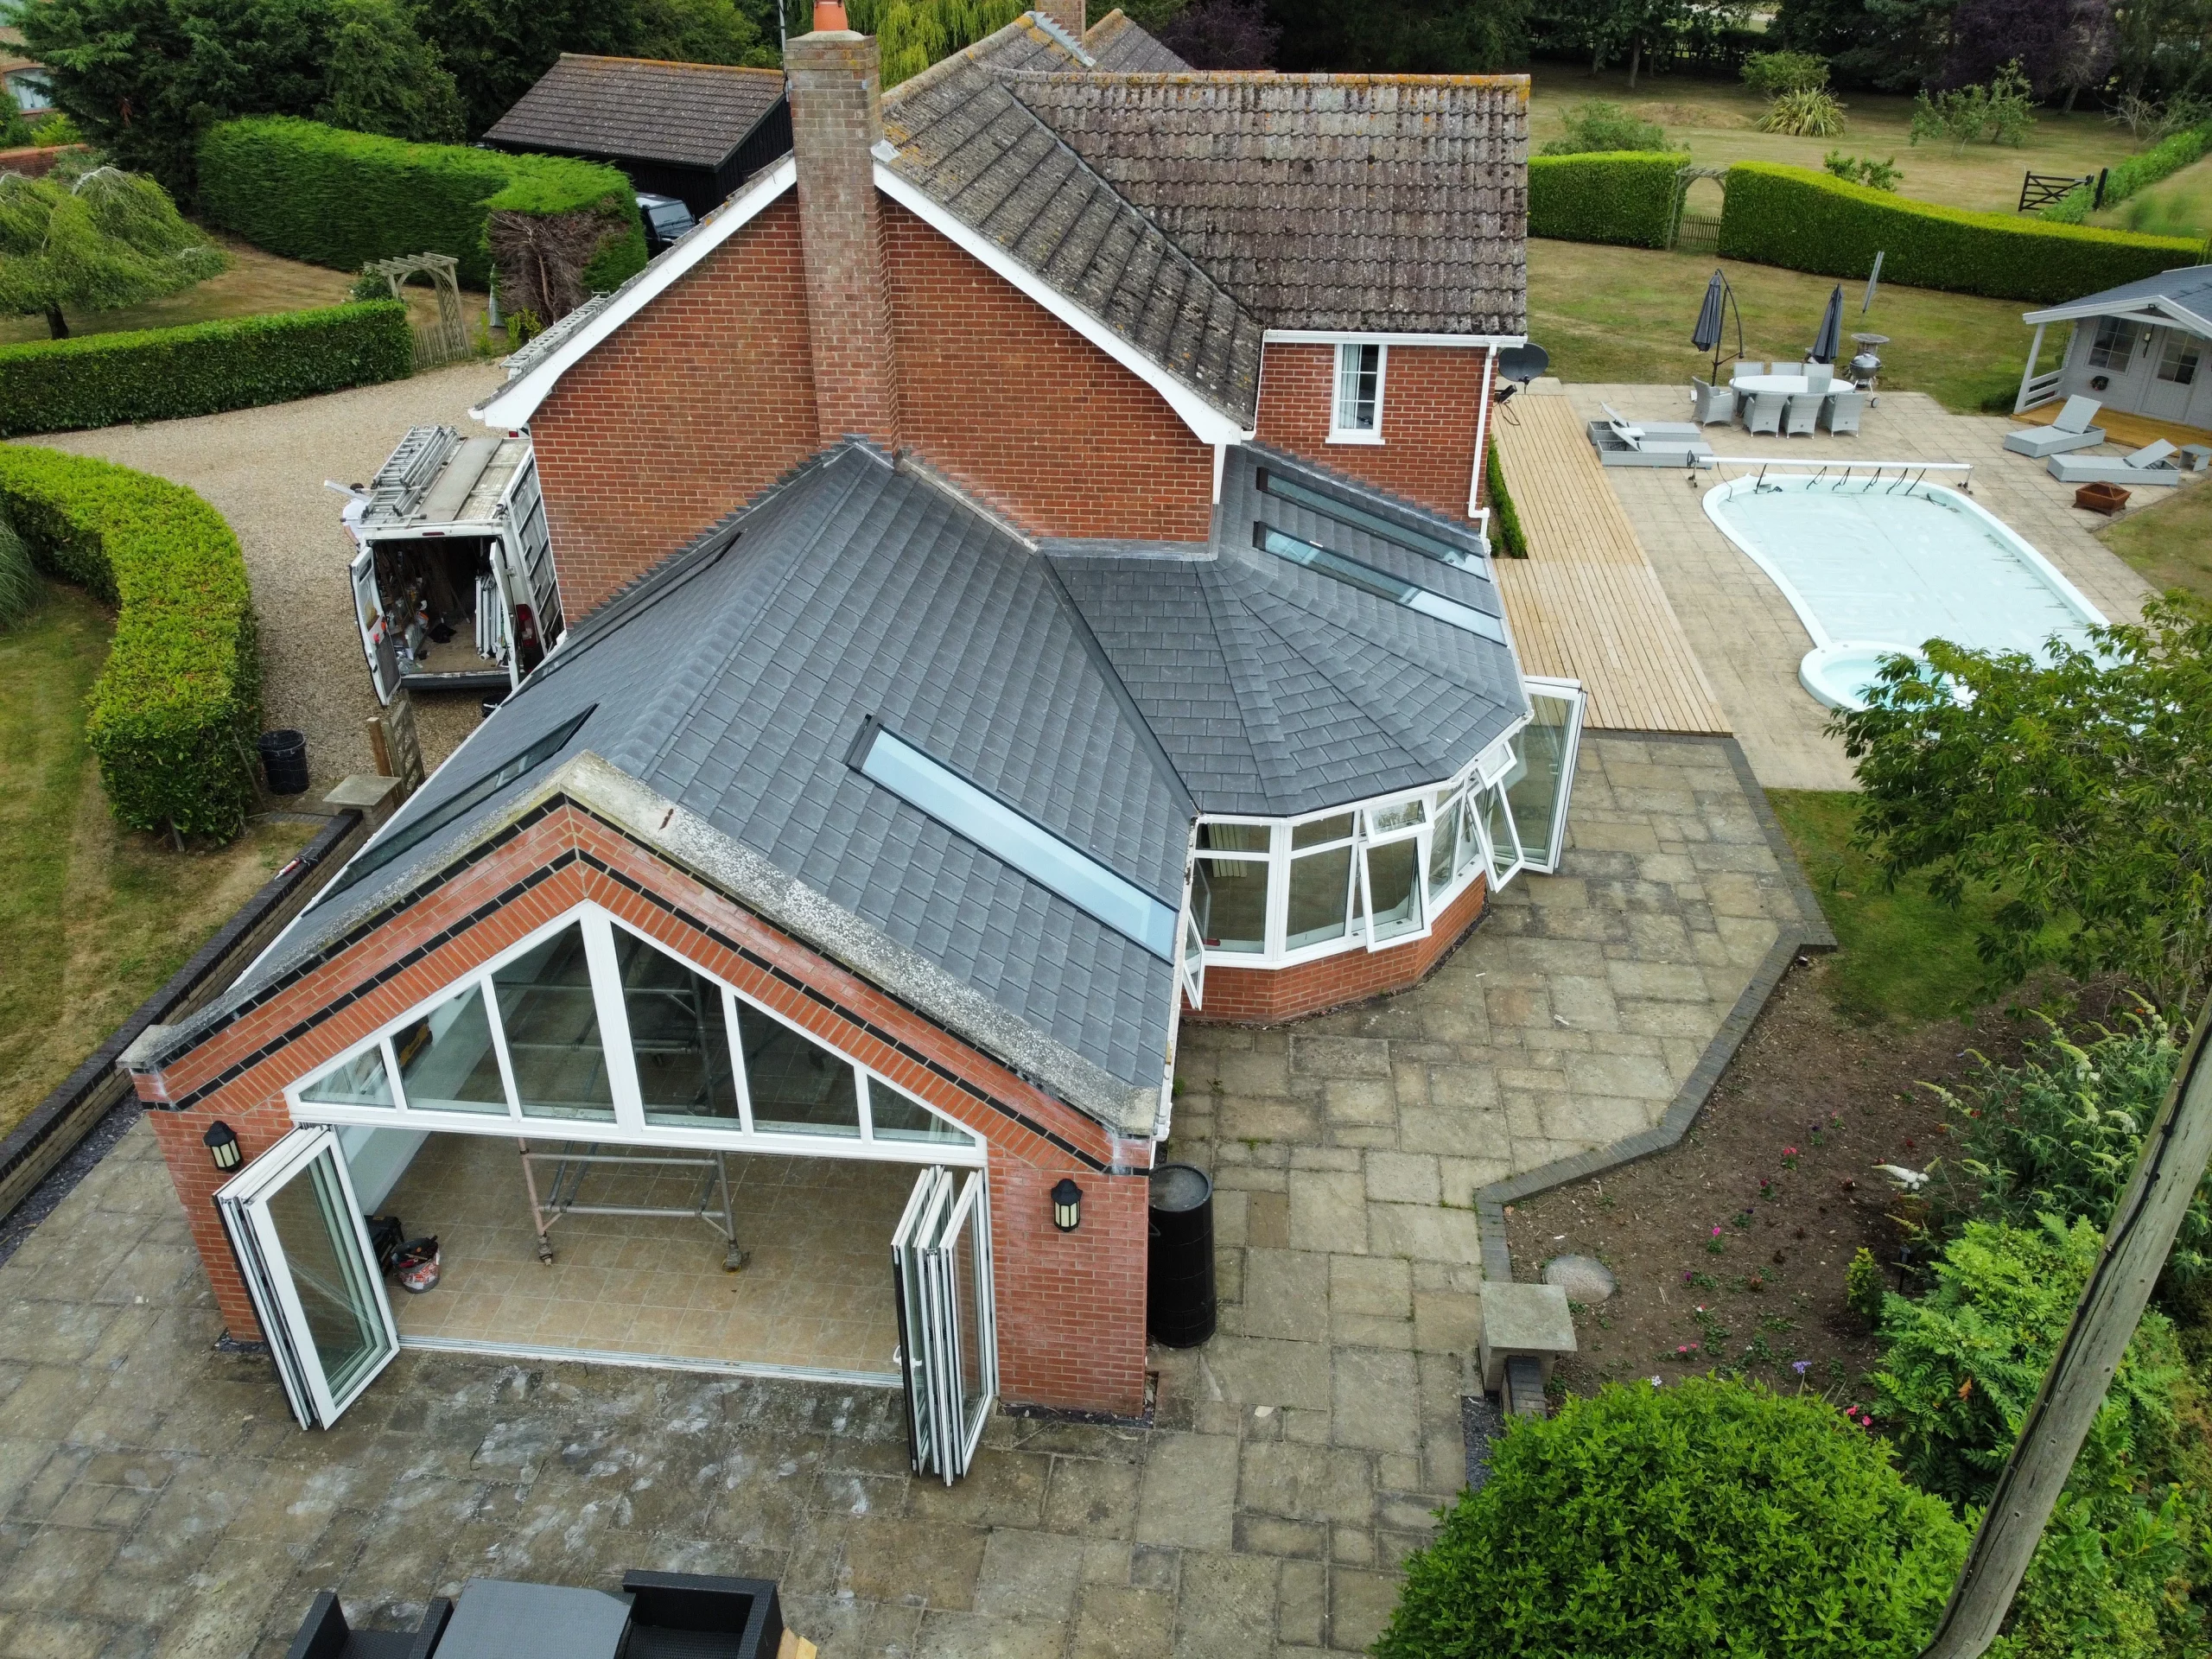 Tiled Conservatory Roofs Installations By Safe and Sound Windows in UK